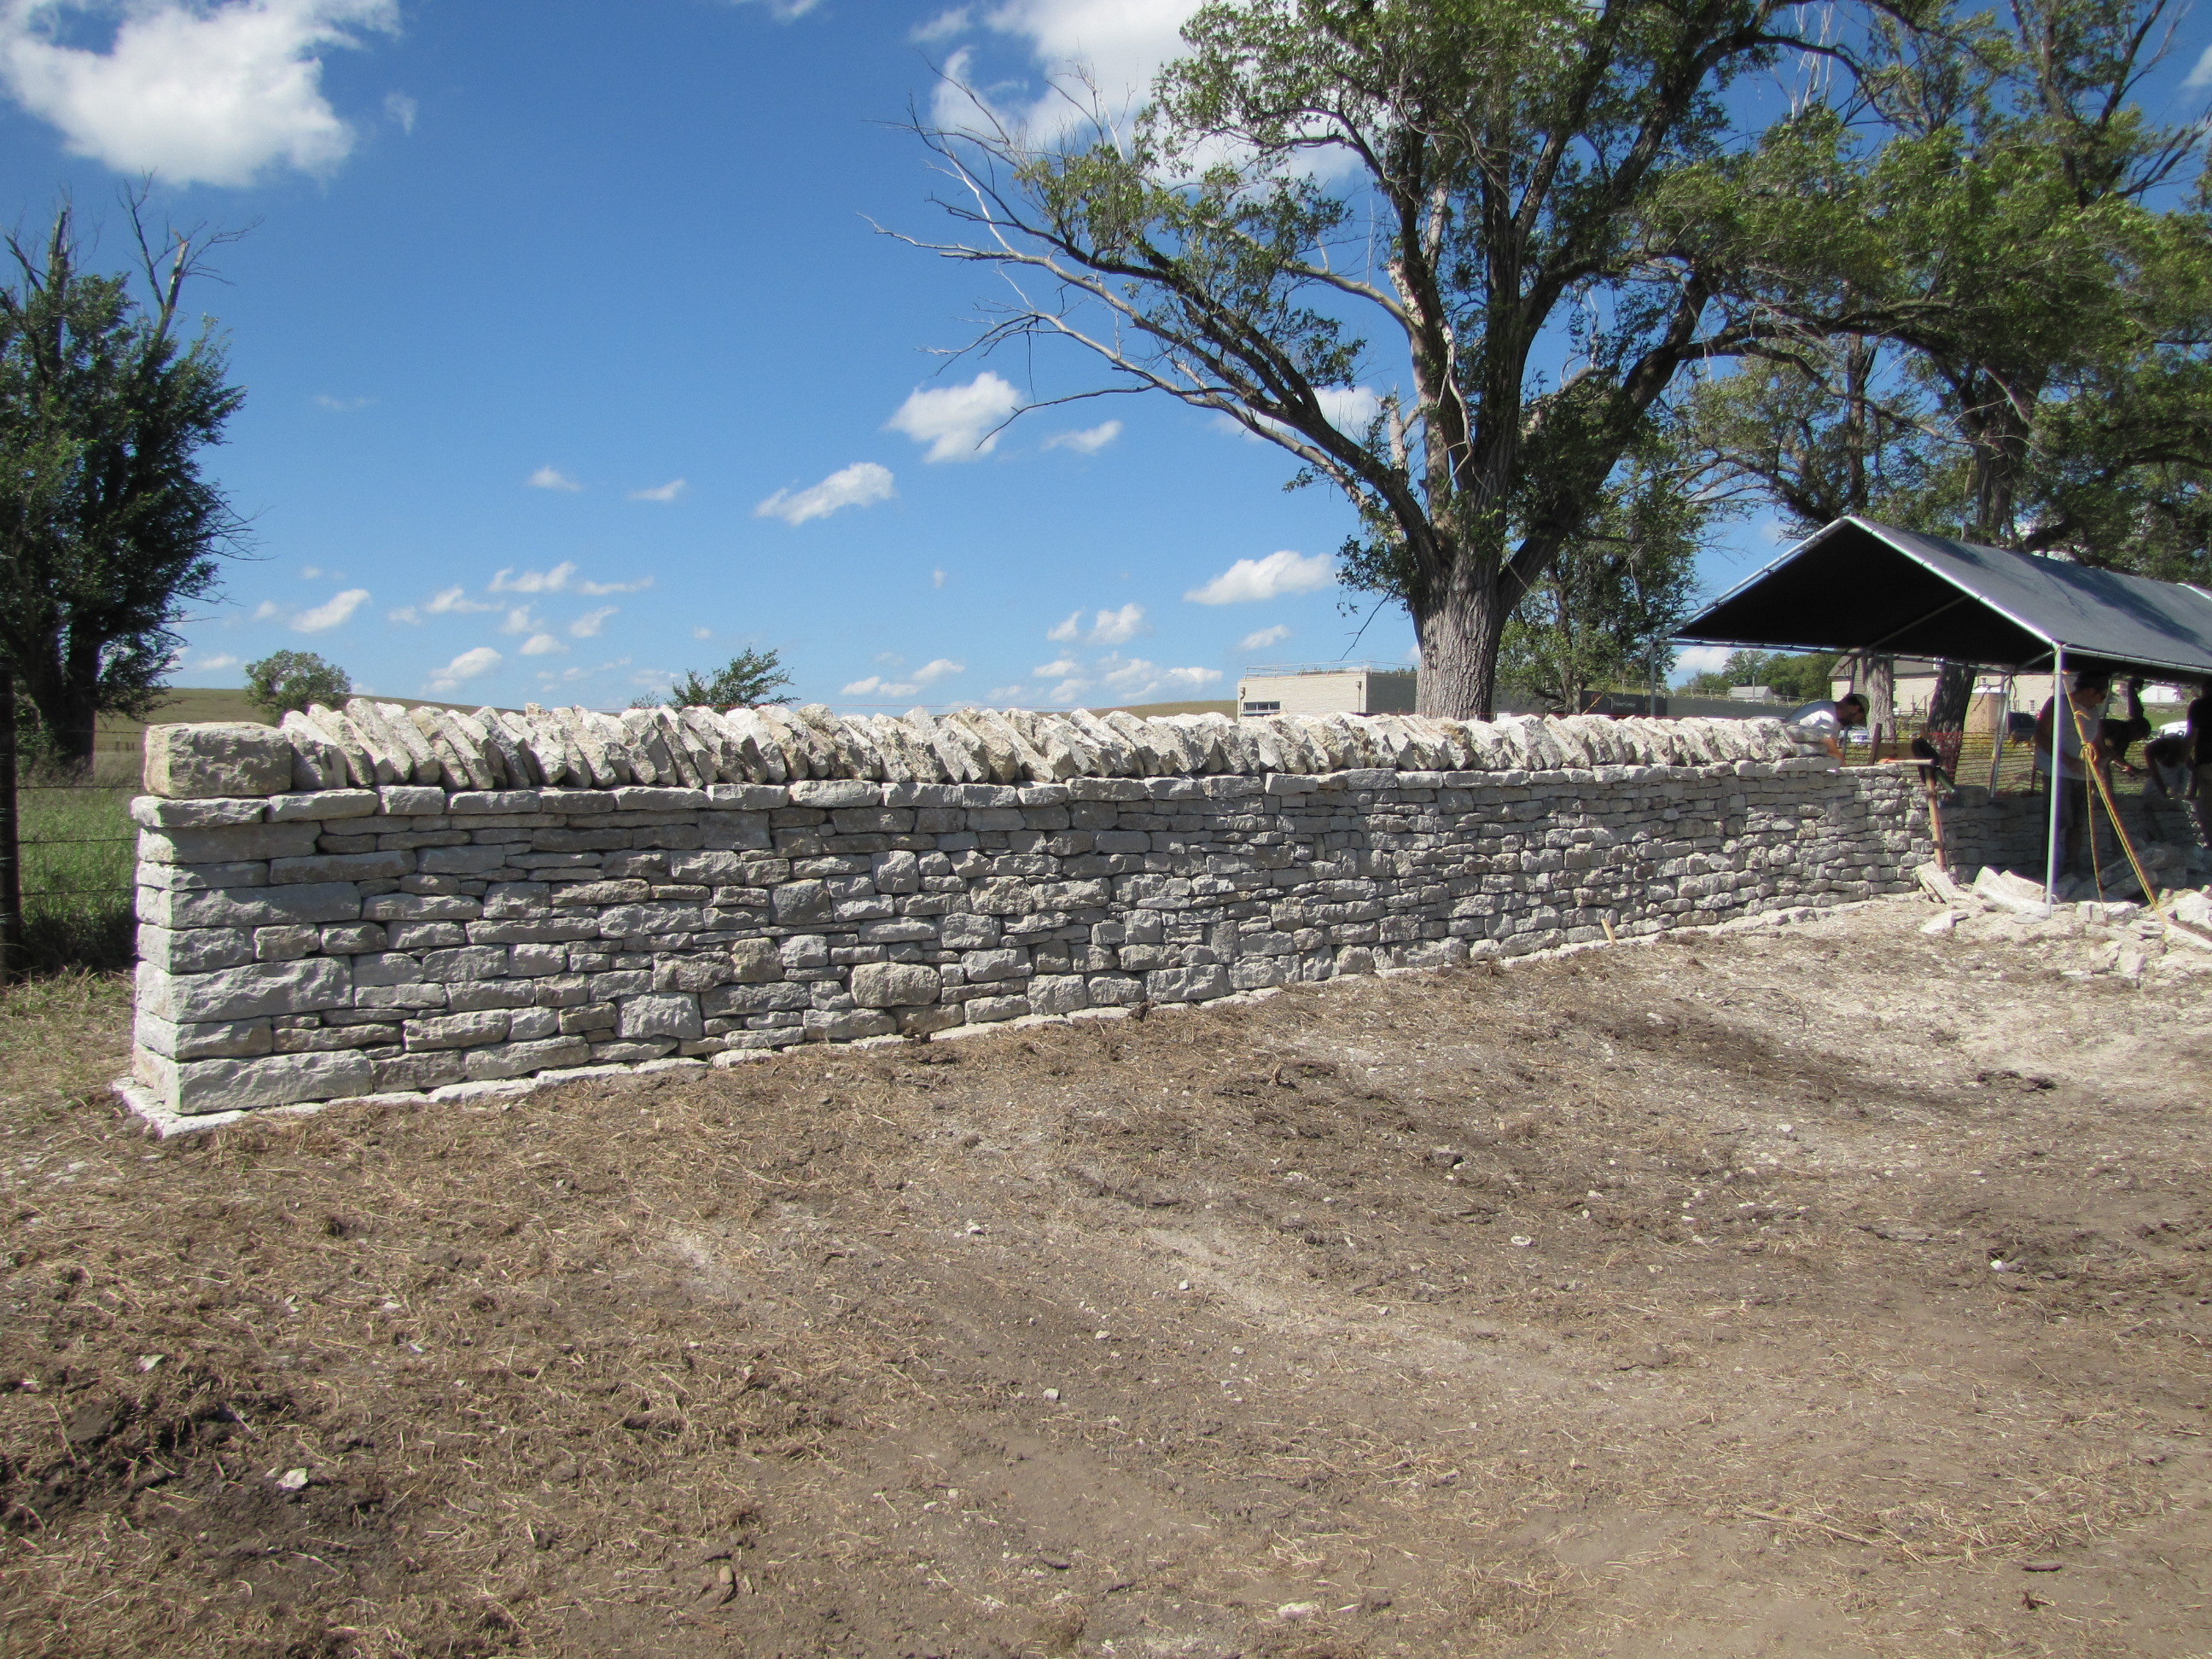 stone fence being rehabilitated at the preserve